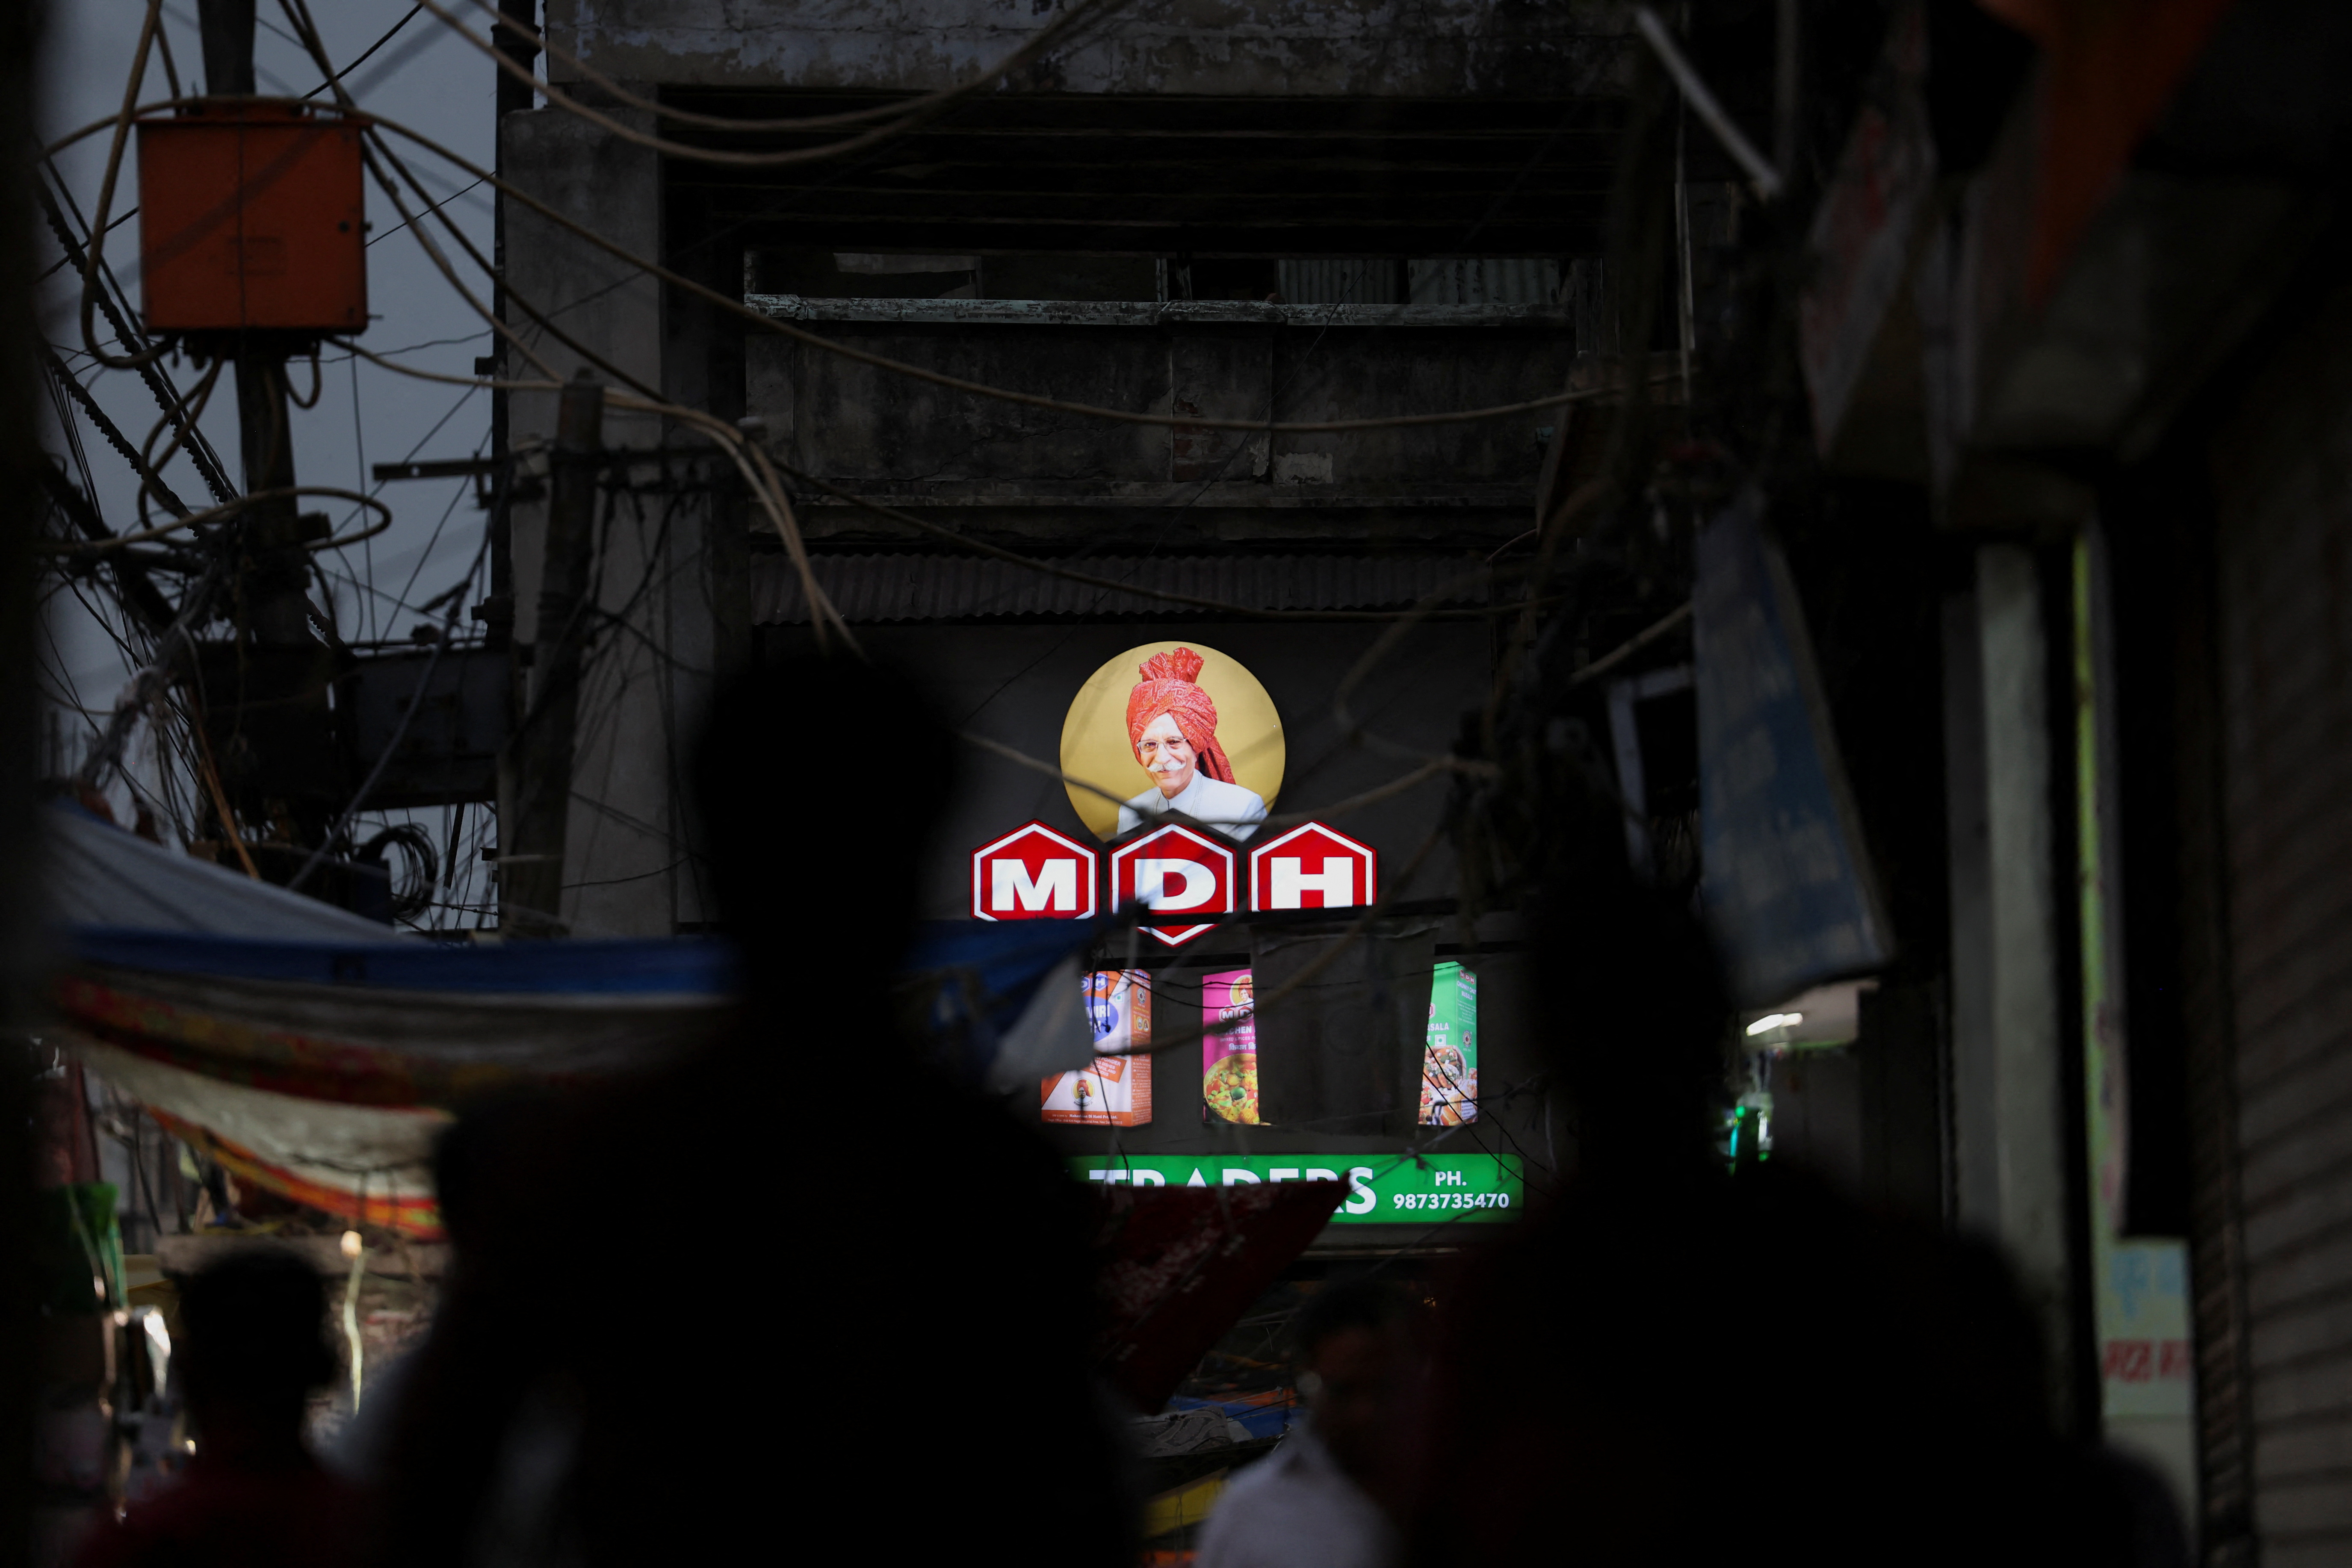 A view of the logo of MDH, an Indian spice manufacturing company, on a shop in the old quarters of Delhi